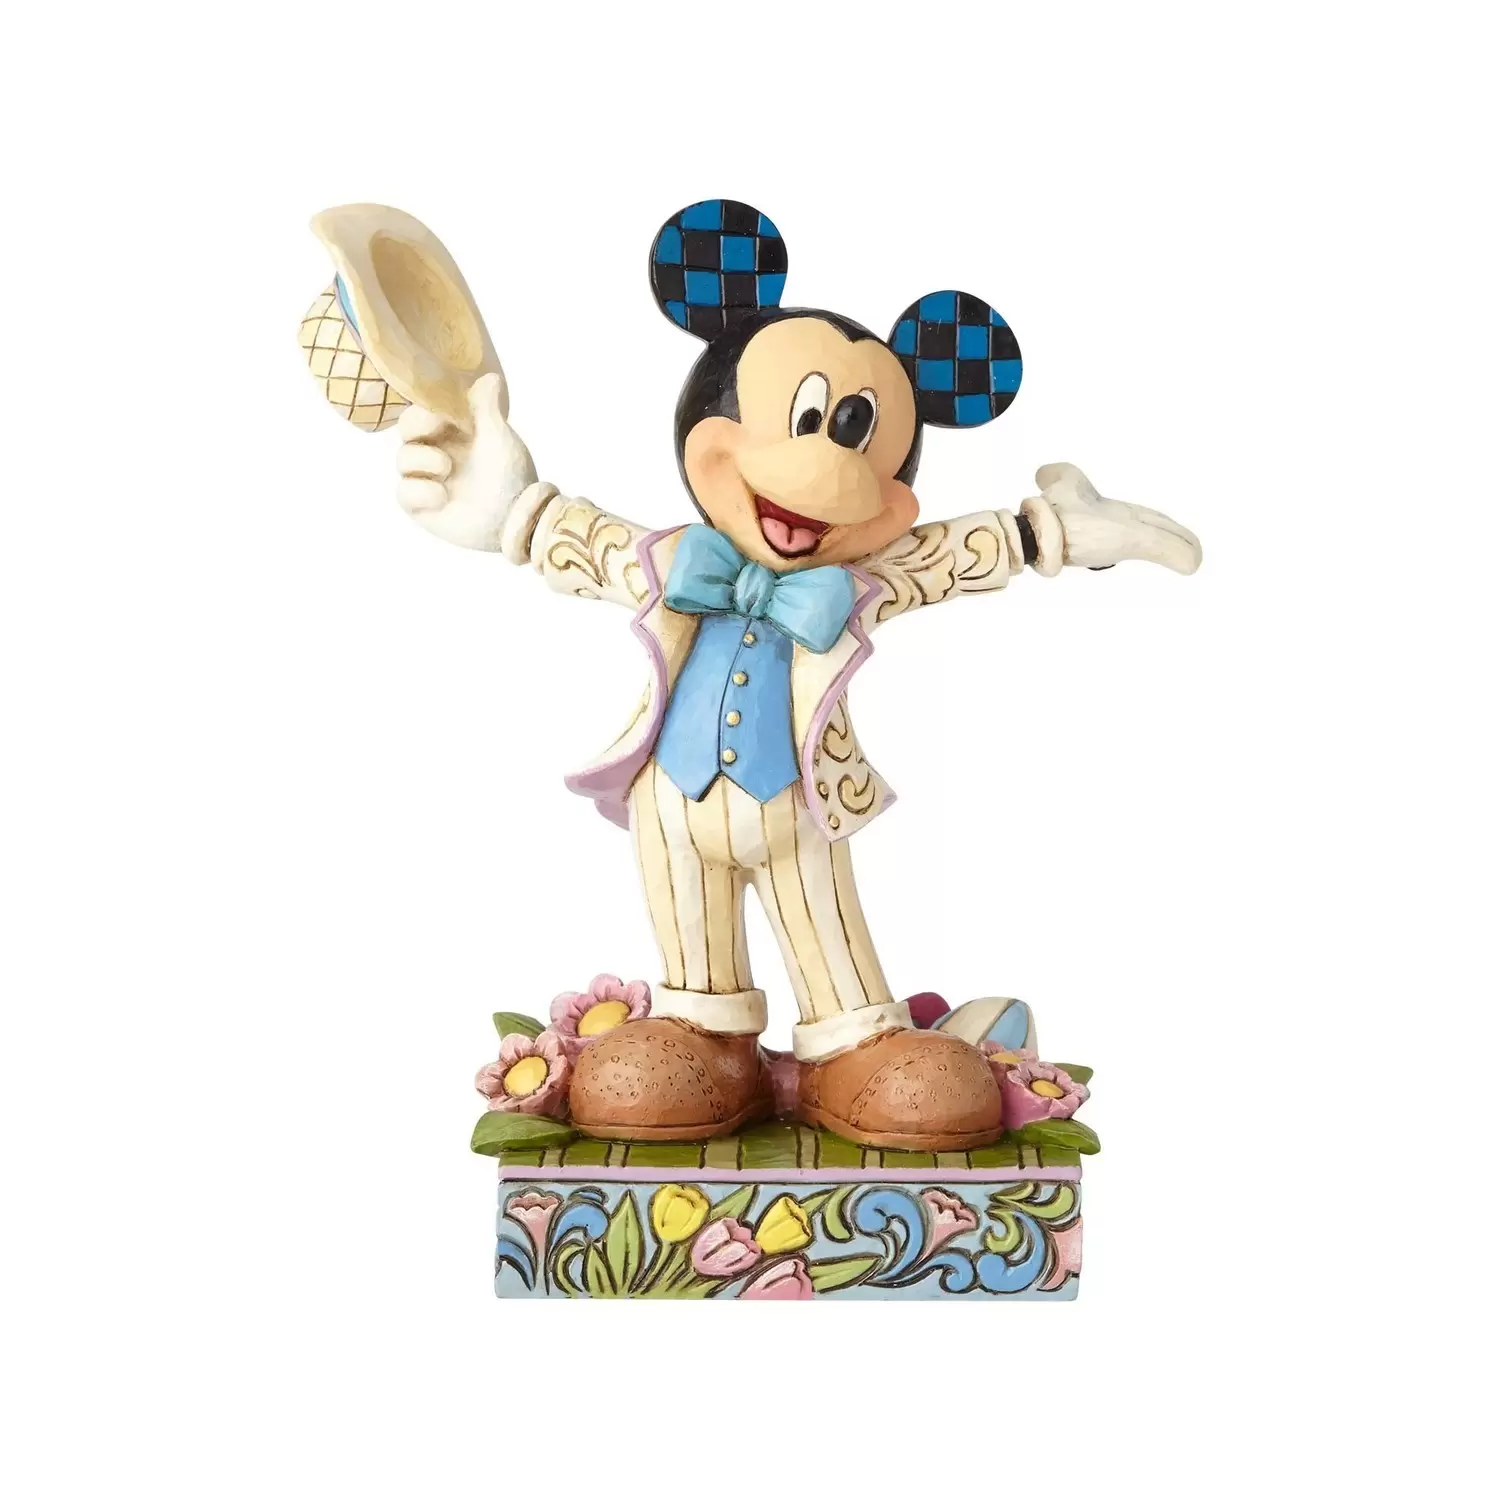 Disney Traditions by Jim Shore - Hats Off to Spring - Easter Mickey Mouse